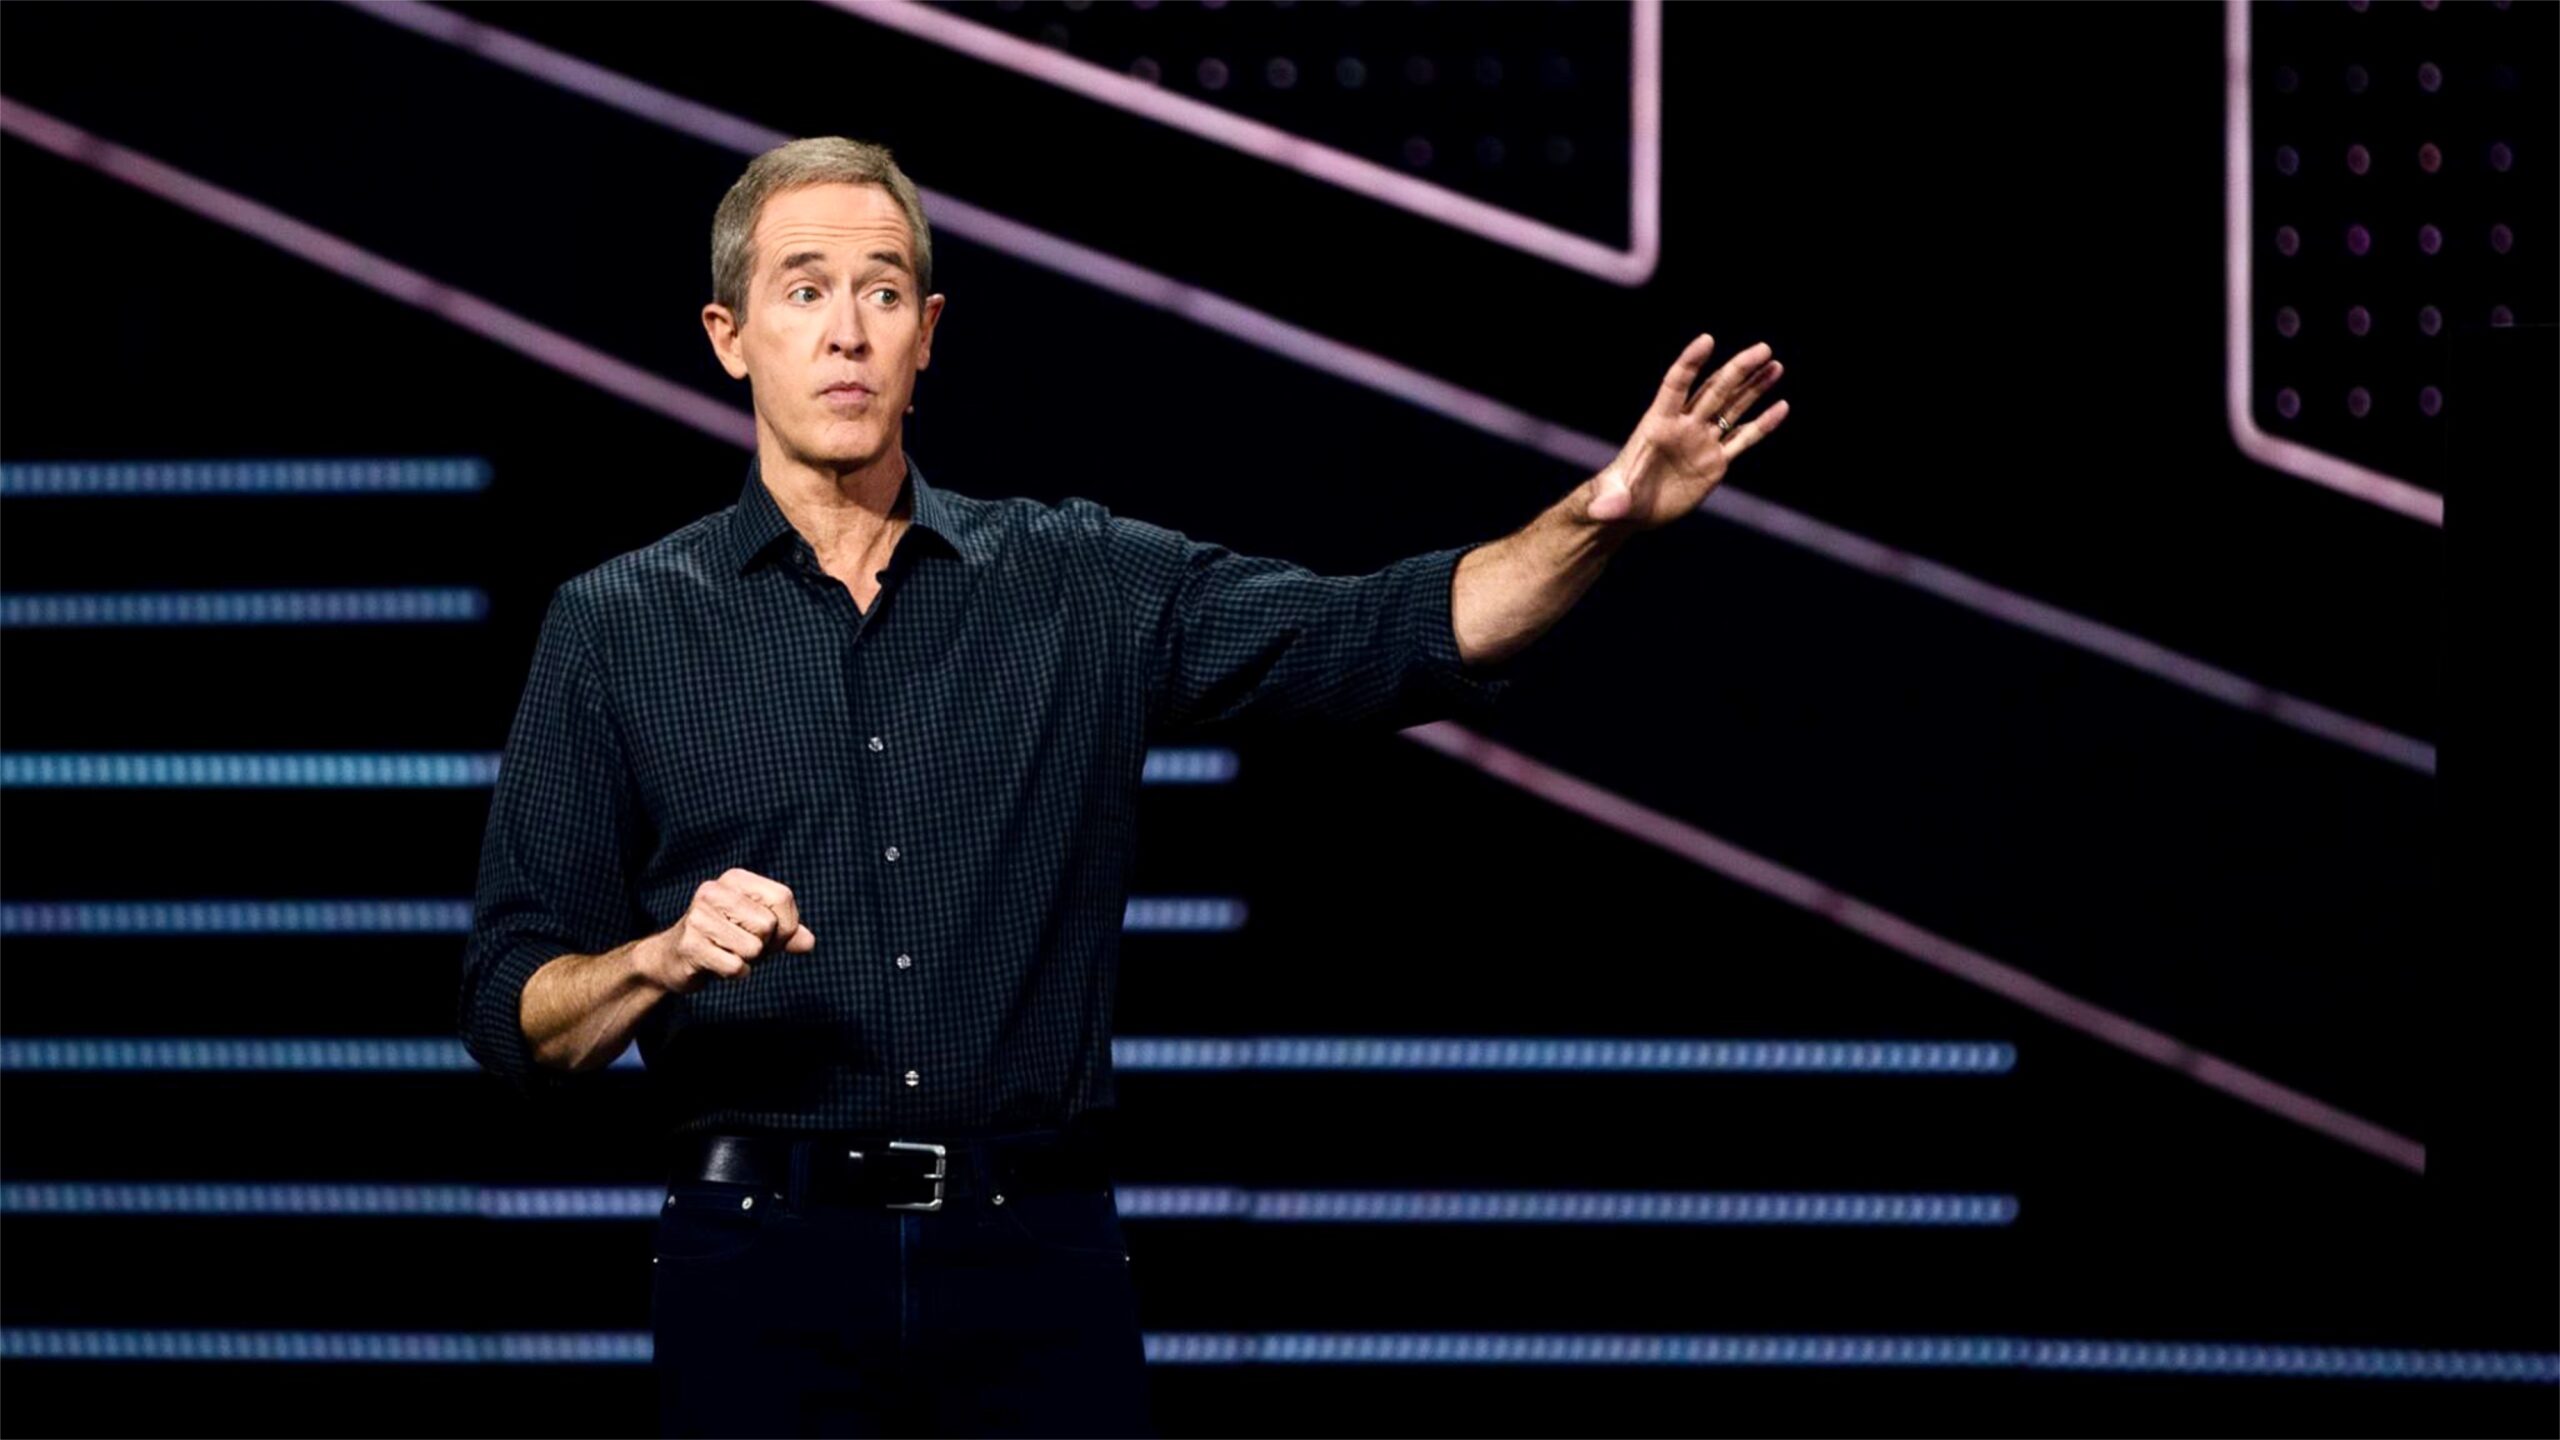 Andy Stanley Holds Conference Instructing Pastors To Affirm LGBT Congregants - Harbingers Daily